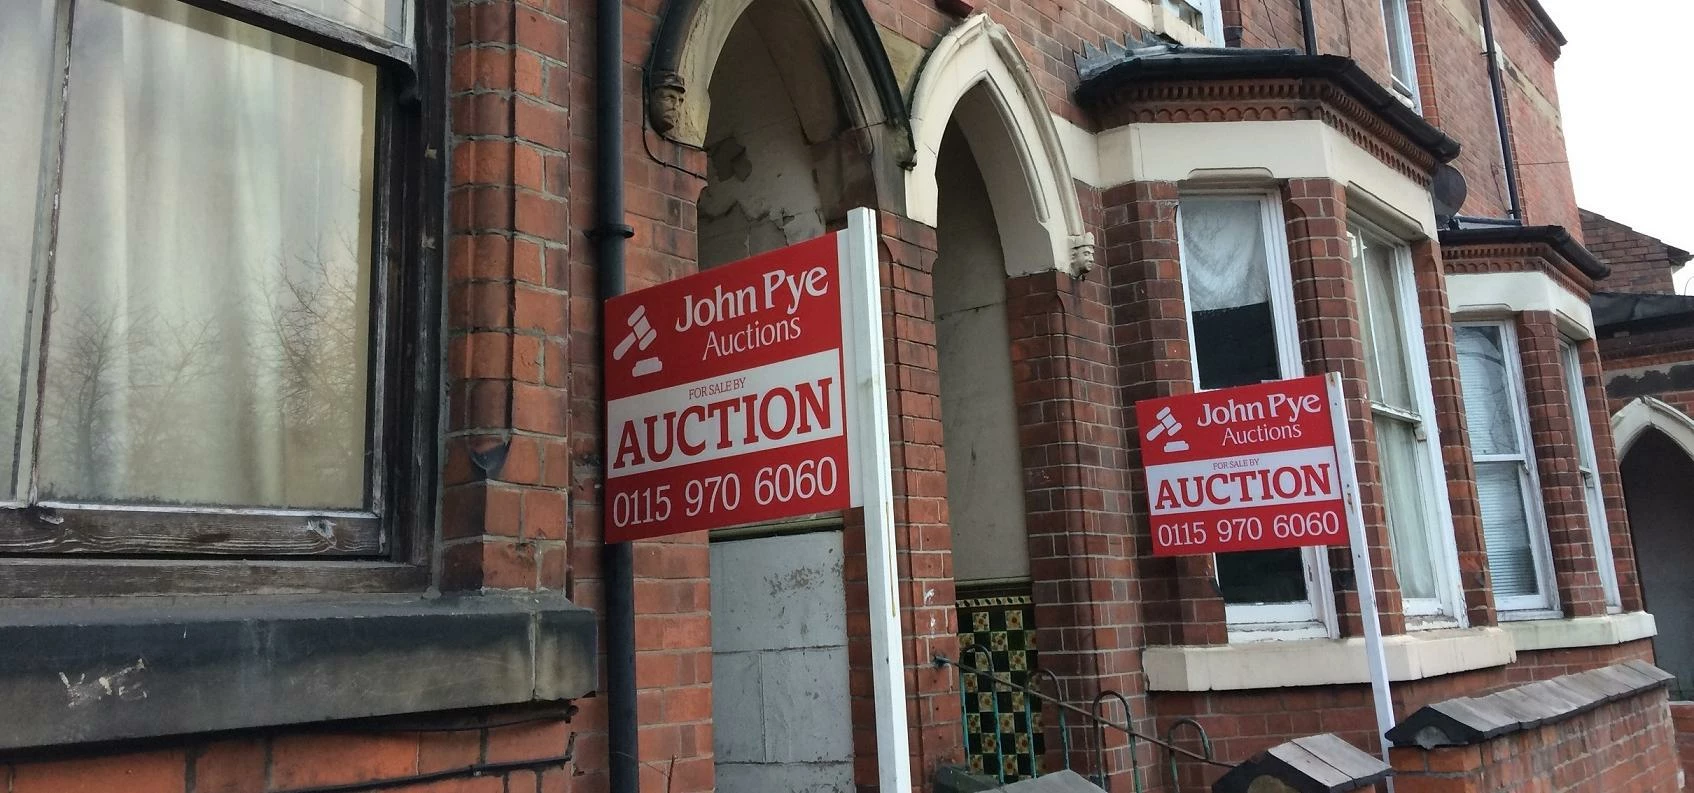 Online auction house John Pye Property has been shortlisted for two top industry awards